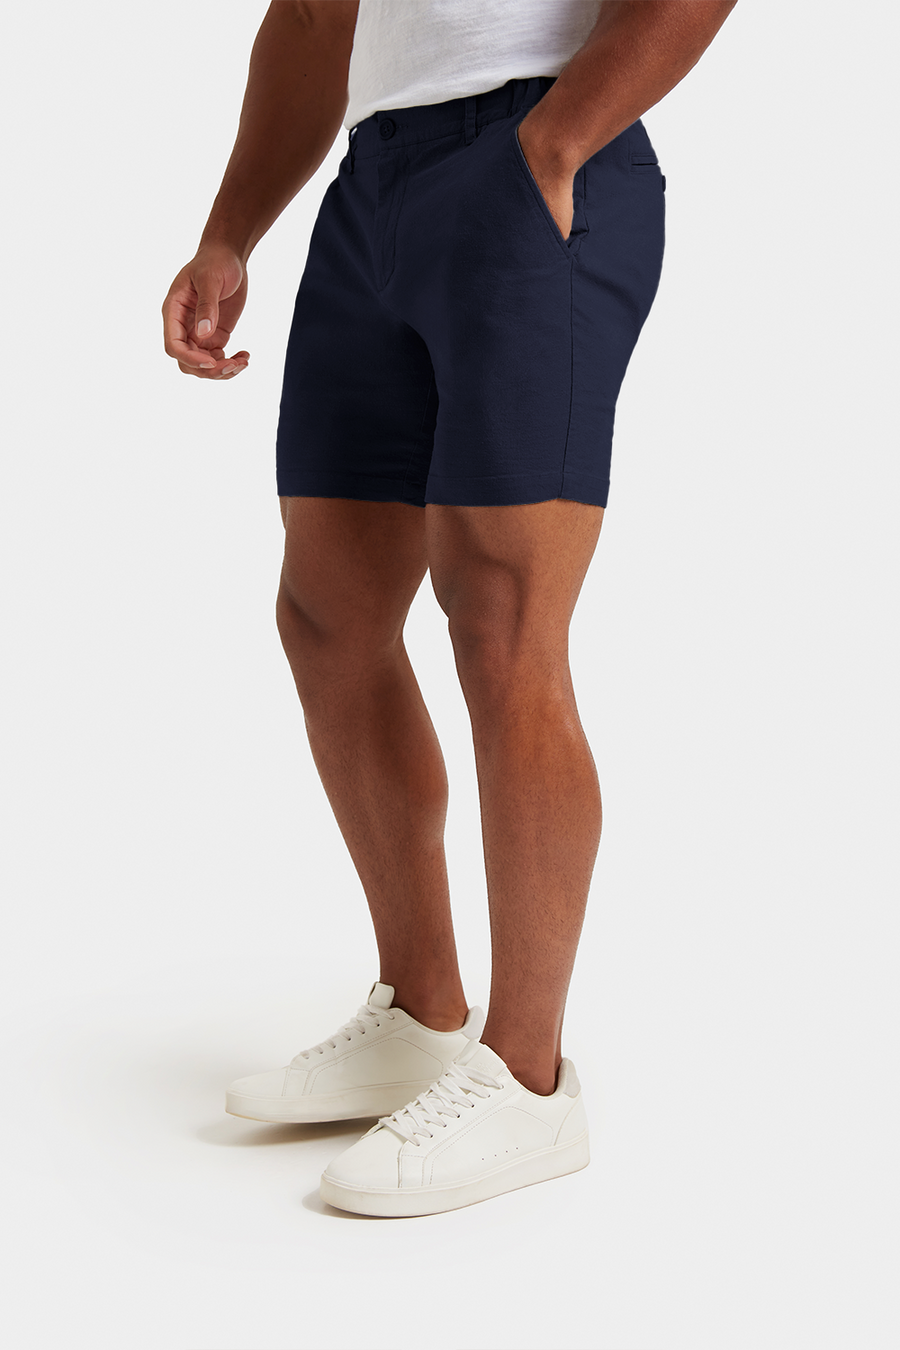 Linen-blend Shorts in Navy - TAILORED ATHLETE - USA